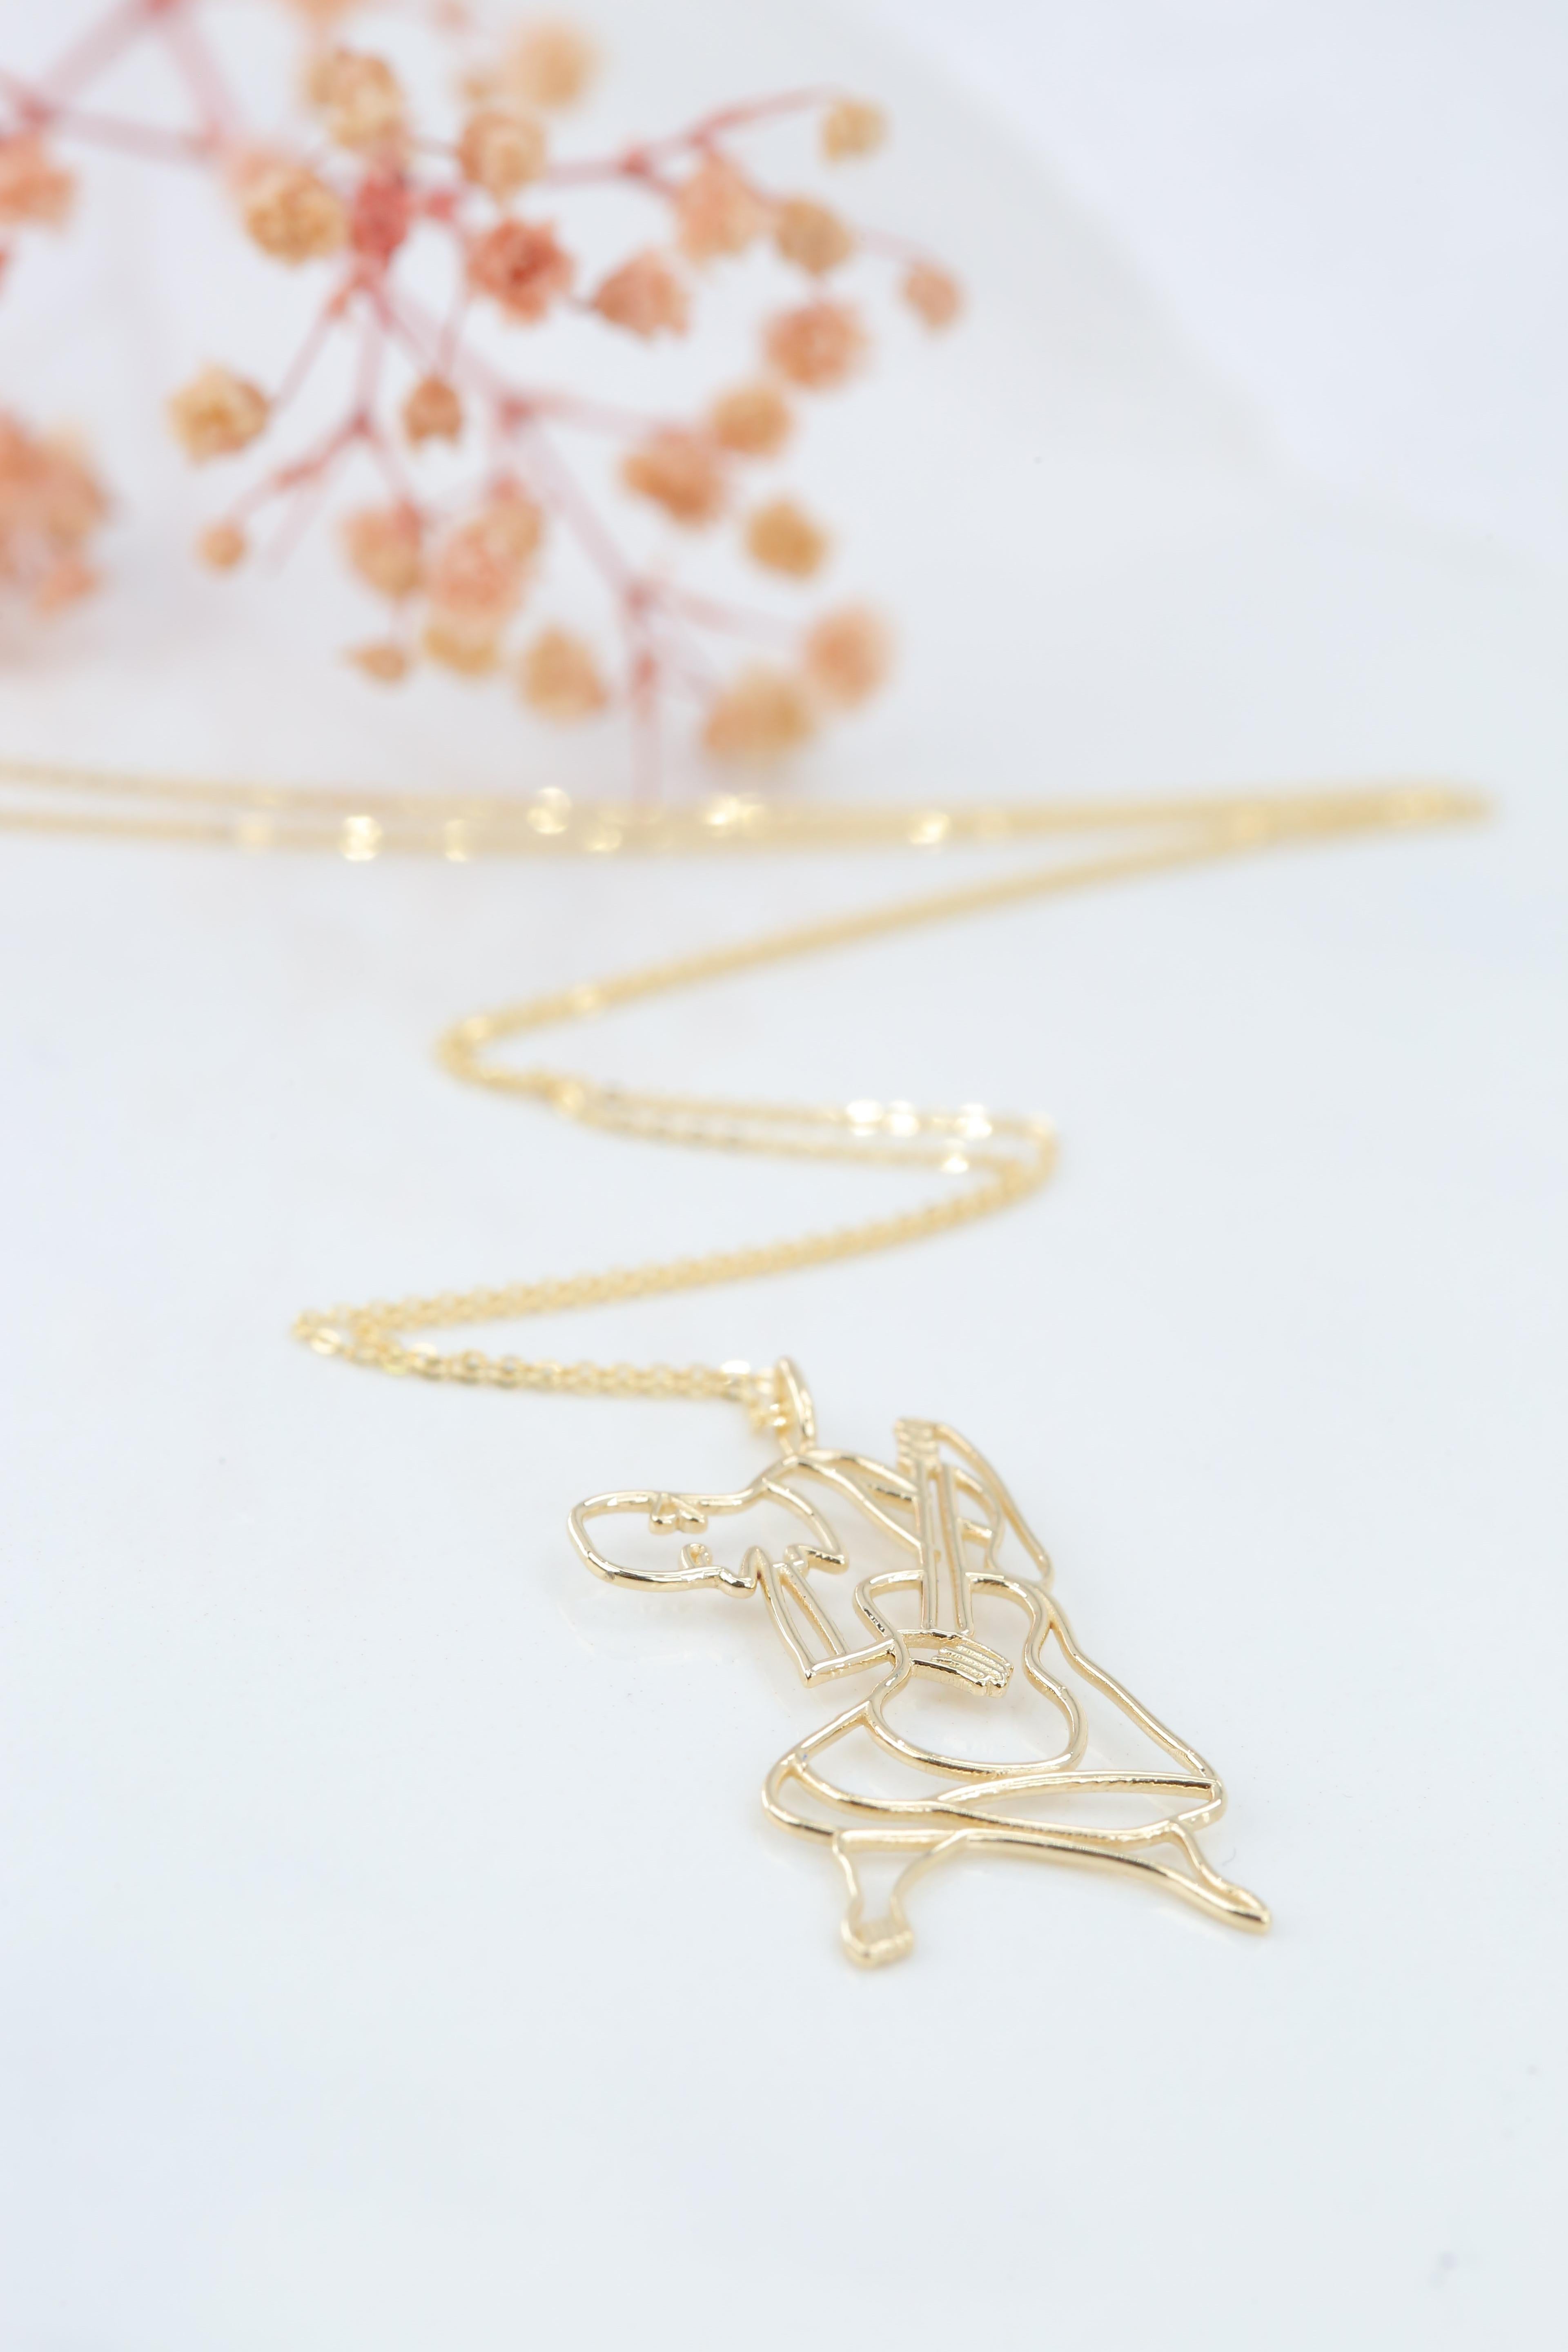 14K Gold Cubic Guitarist Necklace, Inspired by Picasso's 